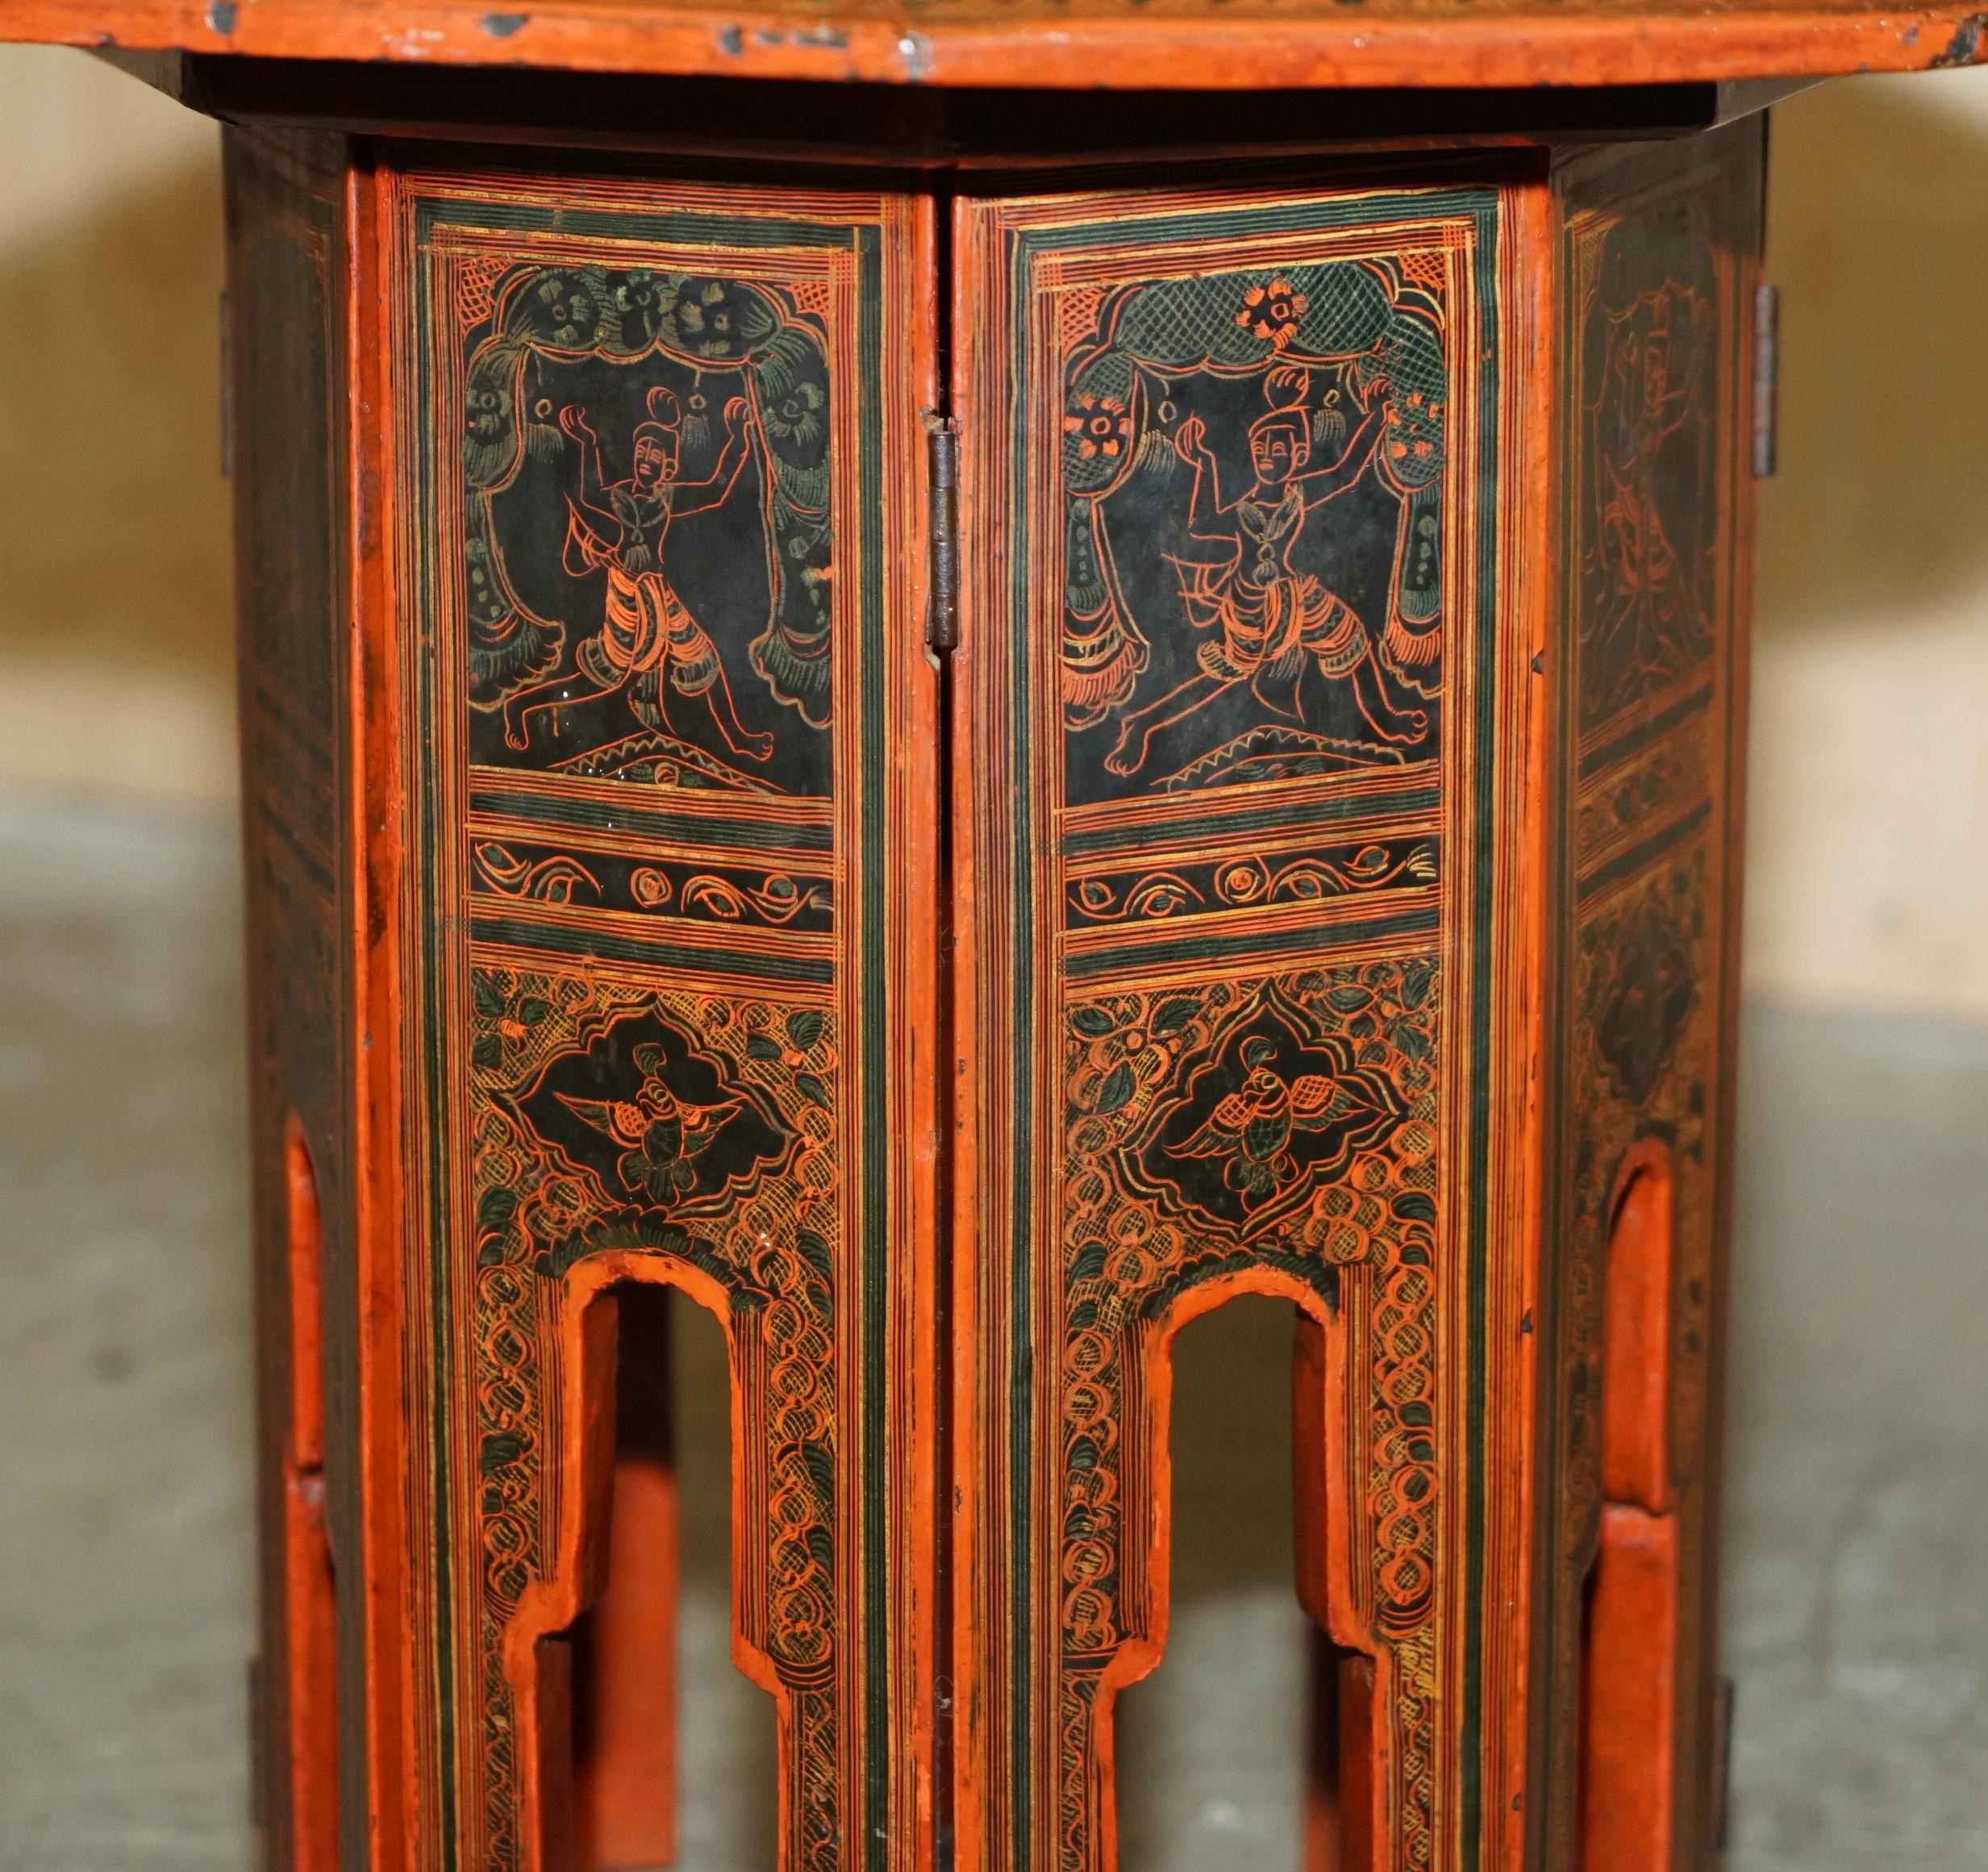 EXQUISITE ANTIQUE CiRCA 1900-1920 BURMESE HAND LACQUERED & PAINTED SIDE TABLE For Sale 2